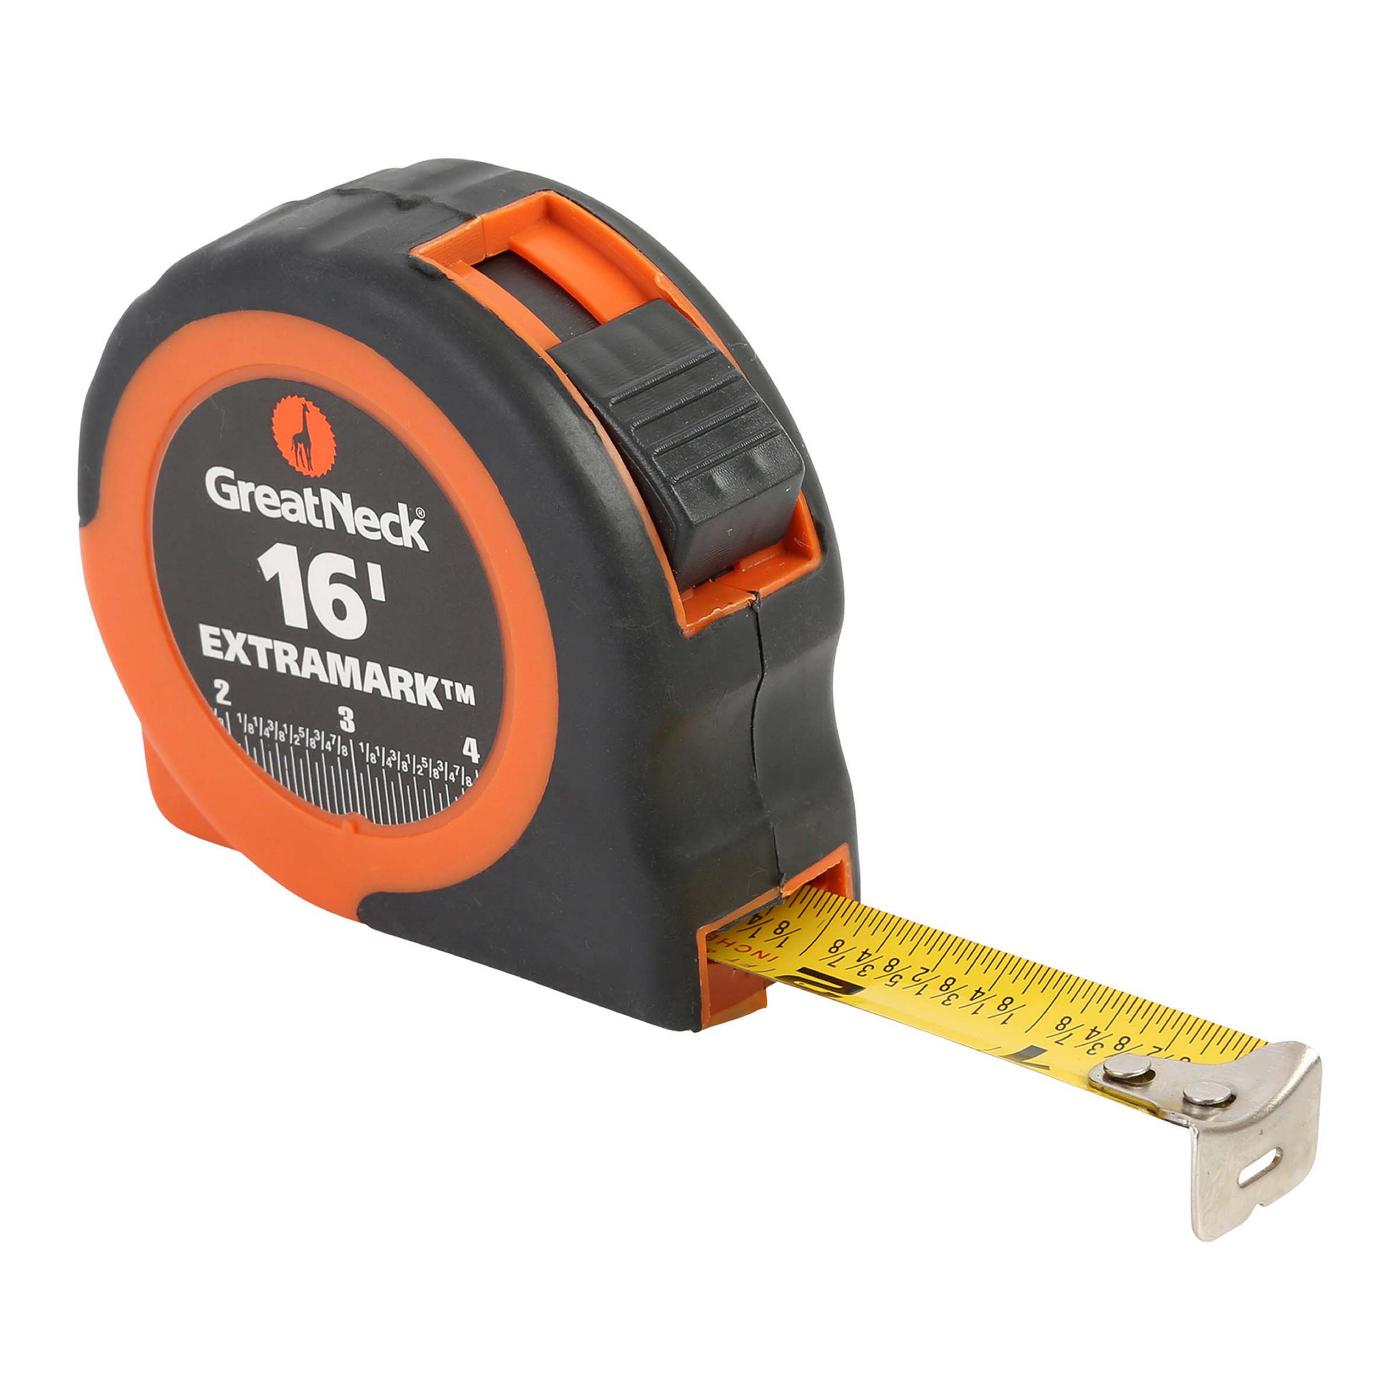 Great Neck ExtraMark™ Rubber Grip Tape Measure; image 8 of 9